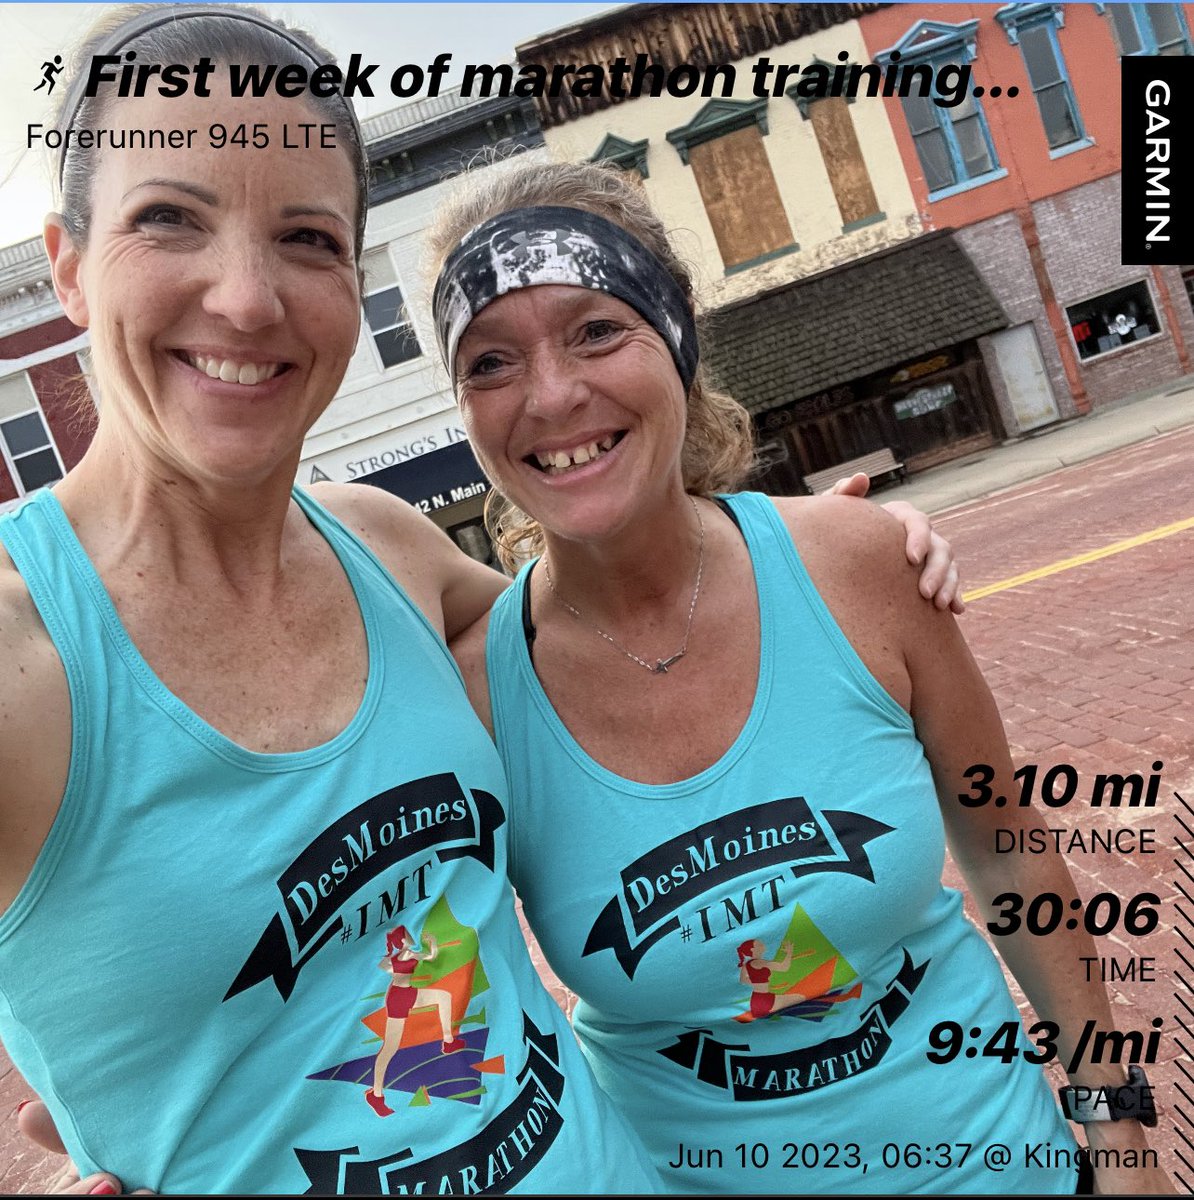 Just completed our first week of Marathon #2 training.   18 weeks are gonna fly by.  🏃🏻‍♀️

Des Moines here we come! 

#IMTDMM
#lovetorun
#runningmom
#weekendrunning
#morningrun